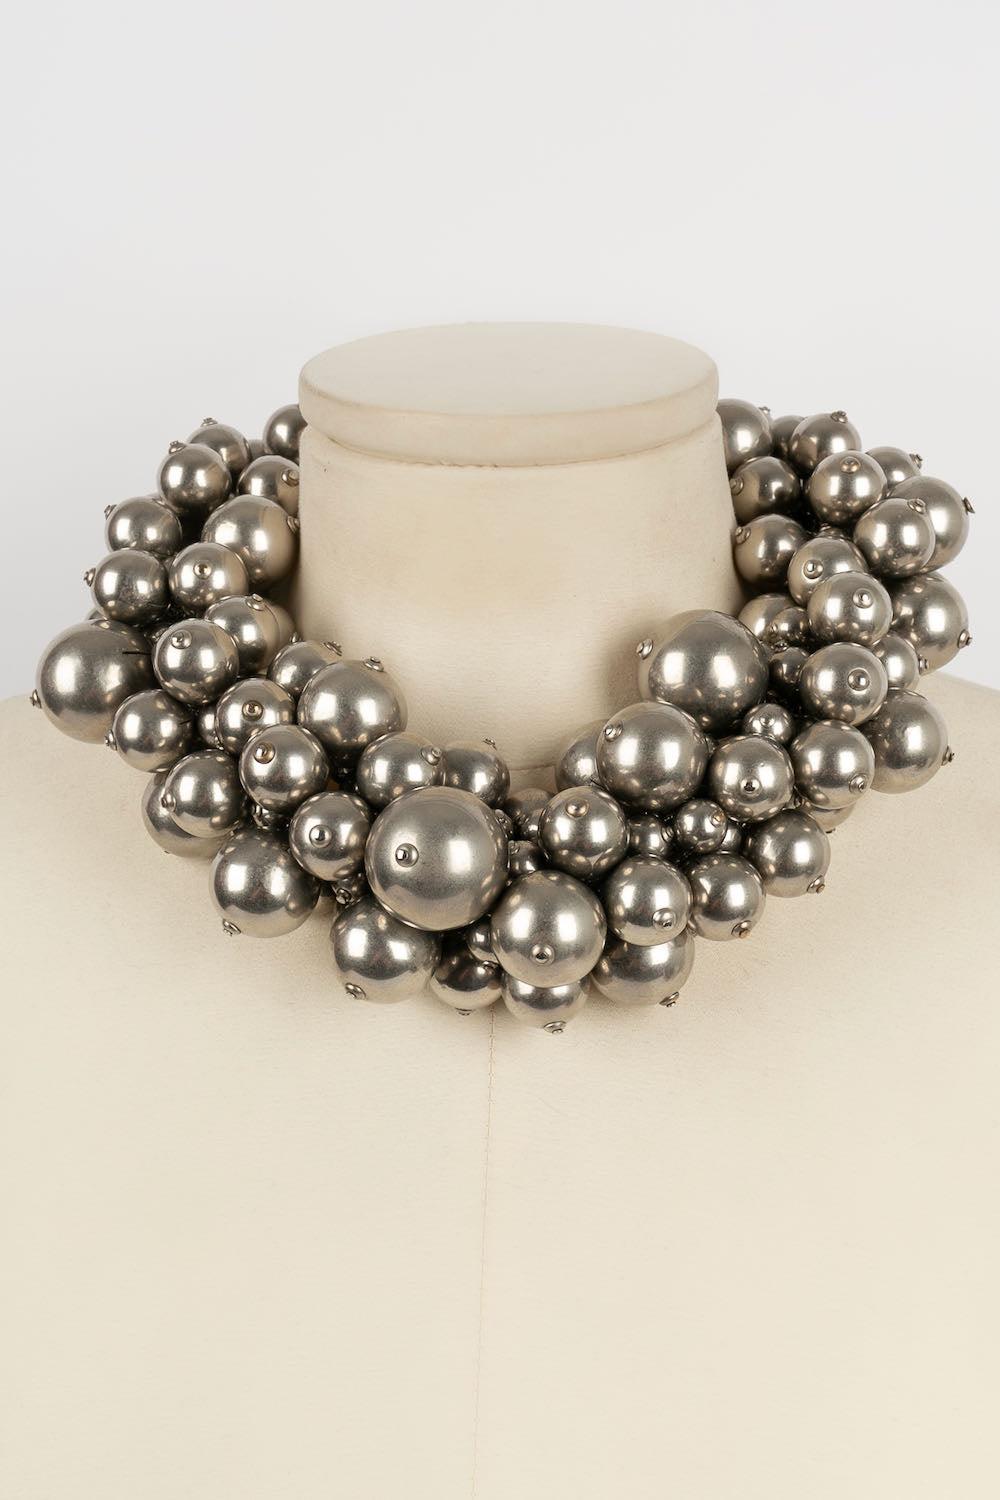 Chanel -(Made in Italy) Short necklace made of silver metal spheres. Summer 2013 collection.

Additional information: 
Dimensions: Length: from 43 cm to 52 cm
Condition: Very good condition
Seller Ref number: CB25